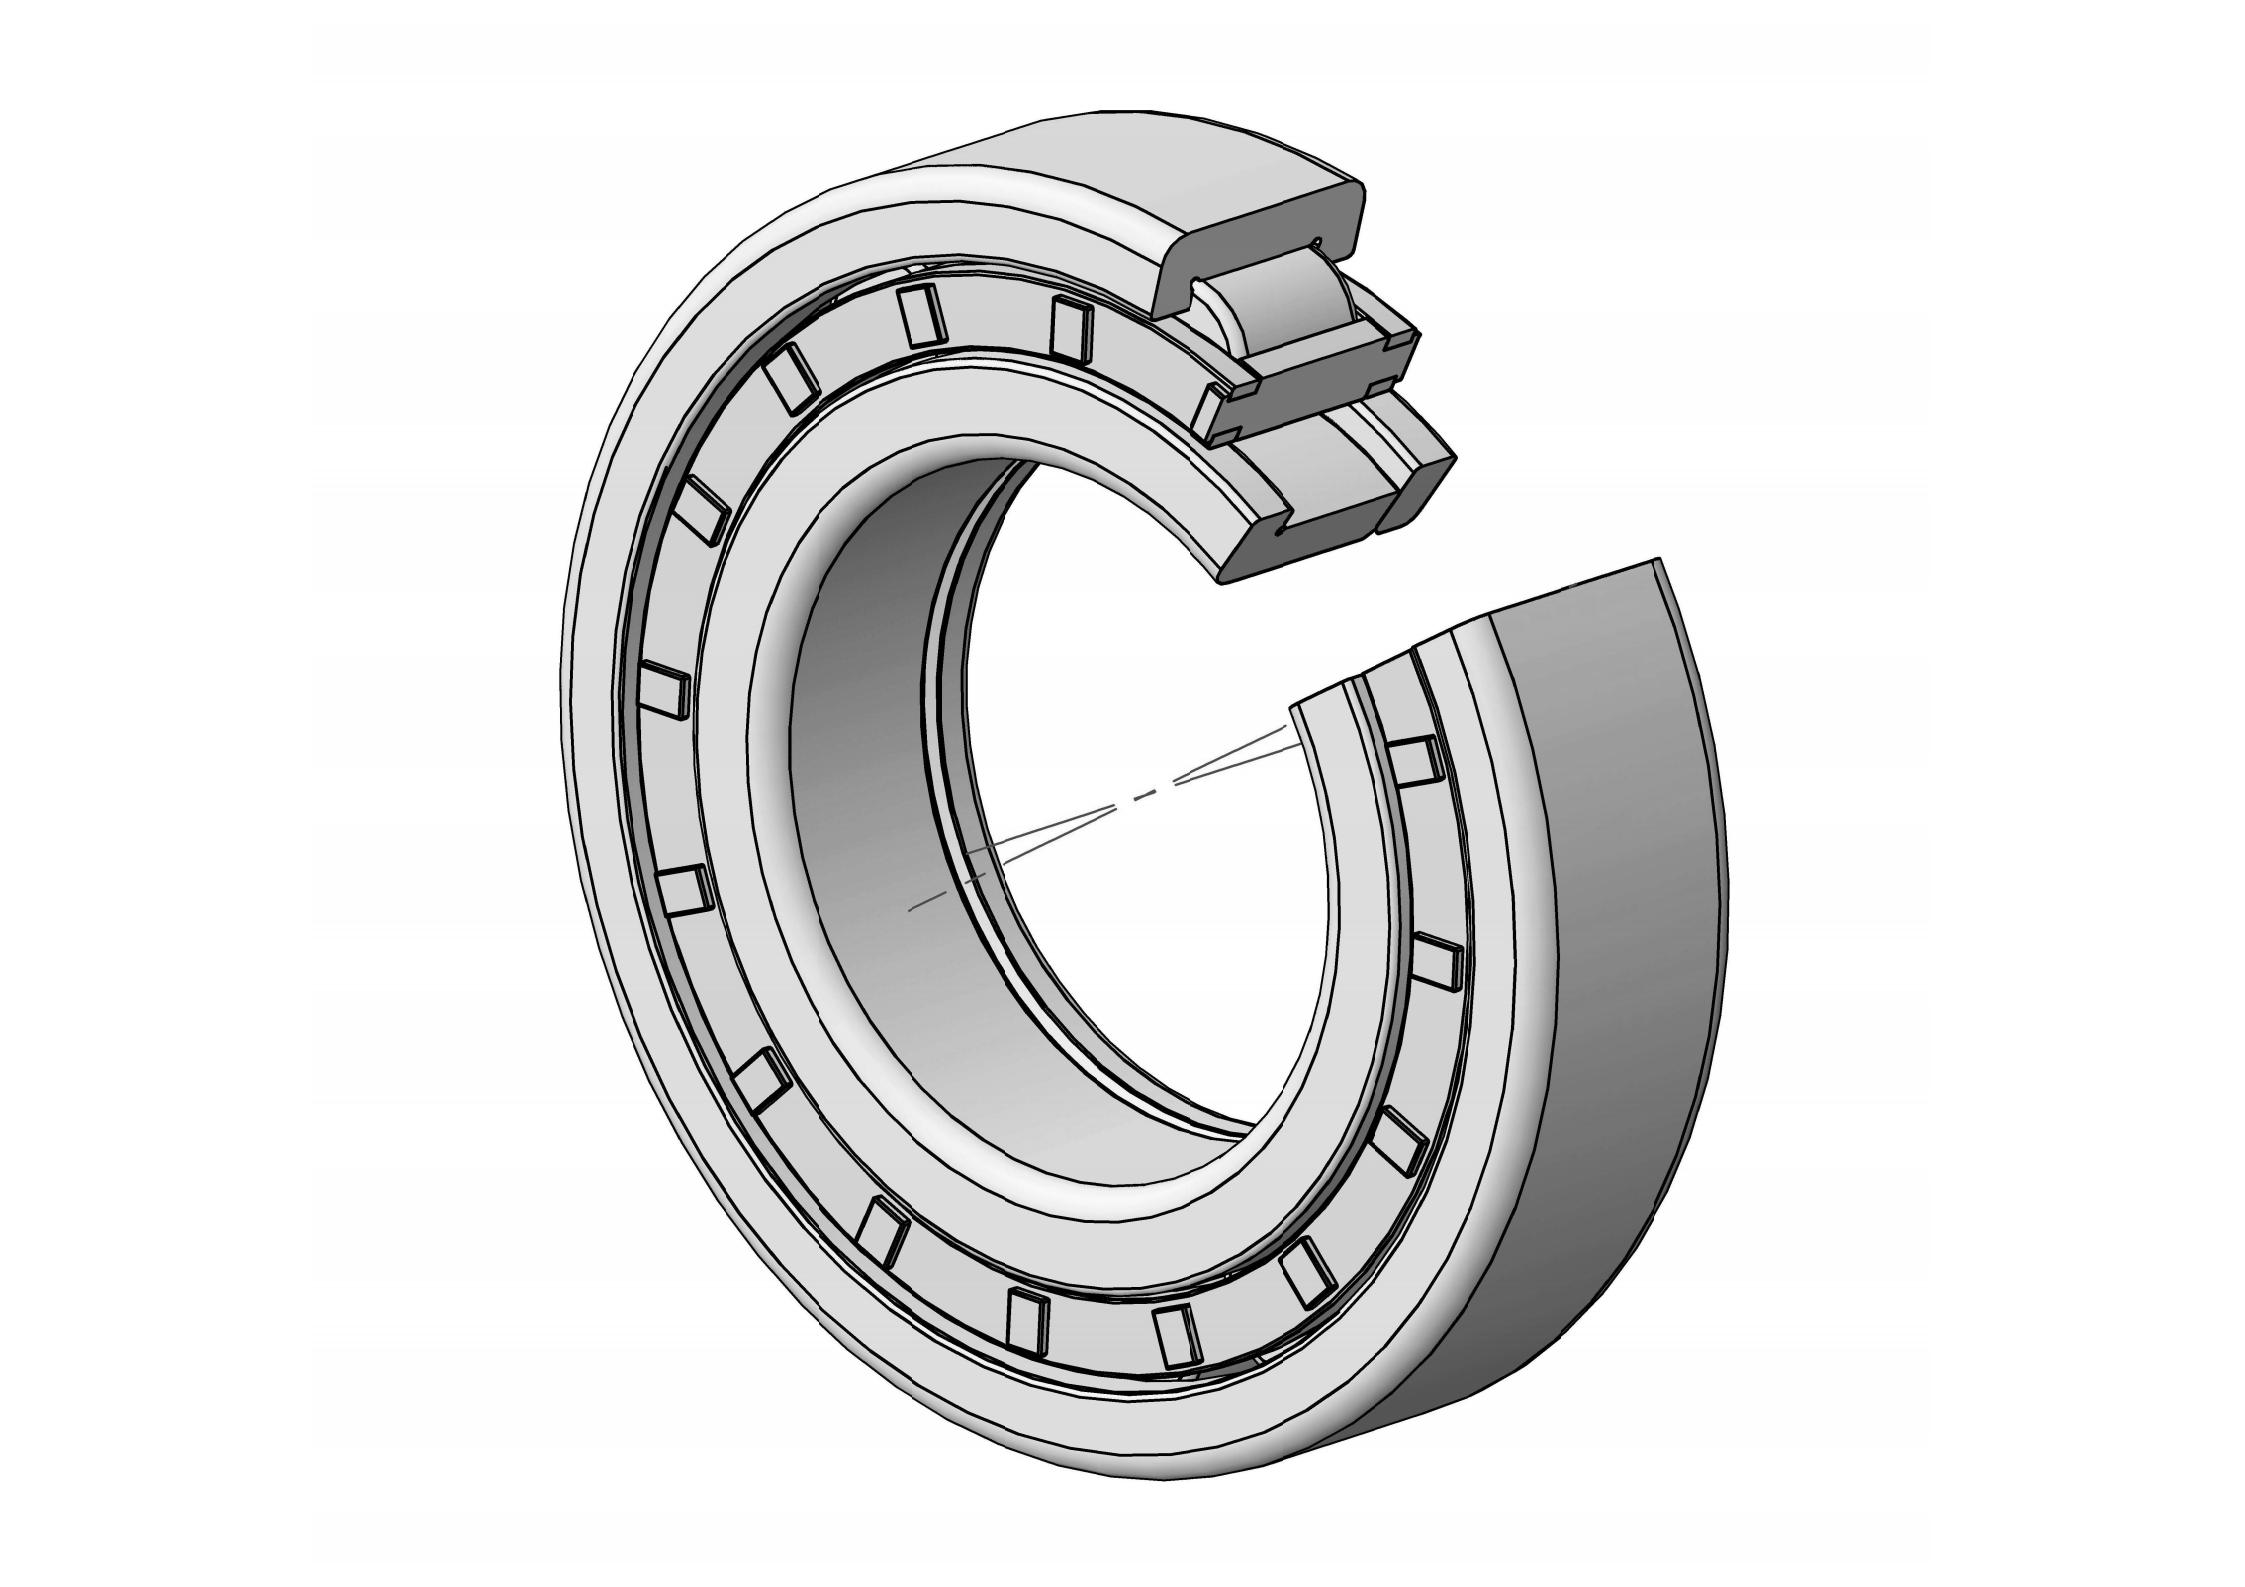 NUP2232-EM Single Row Cylindrical roller bearing 